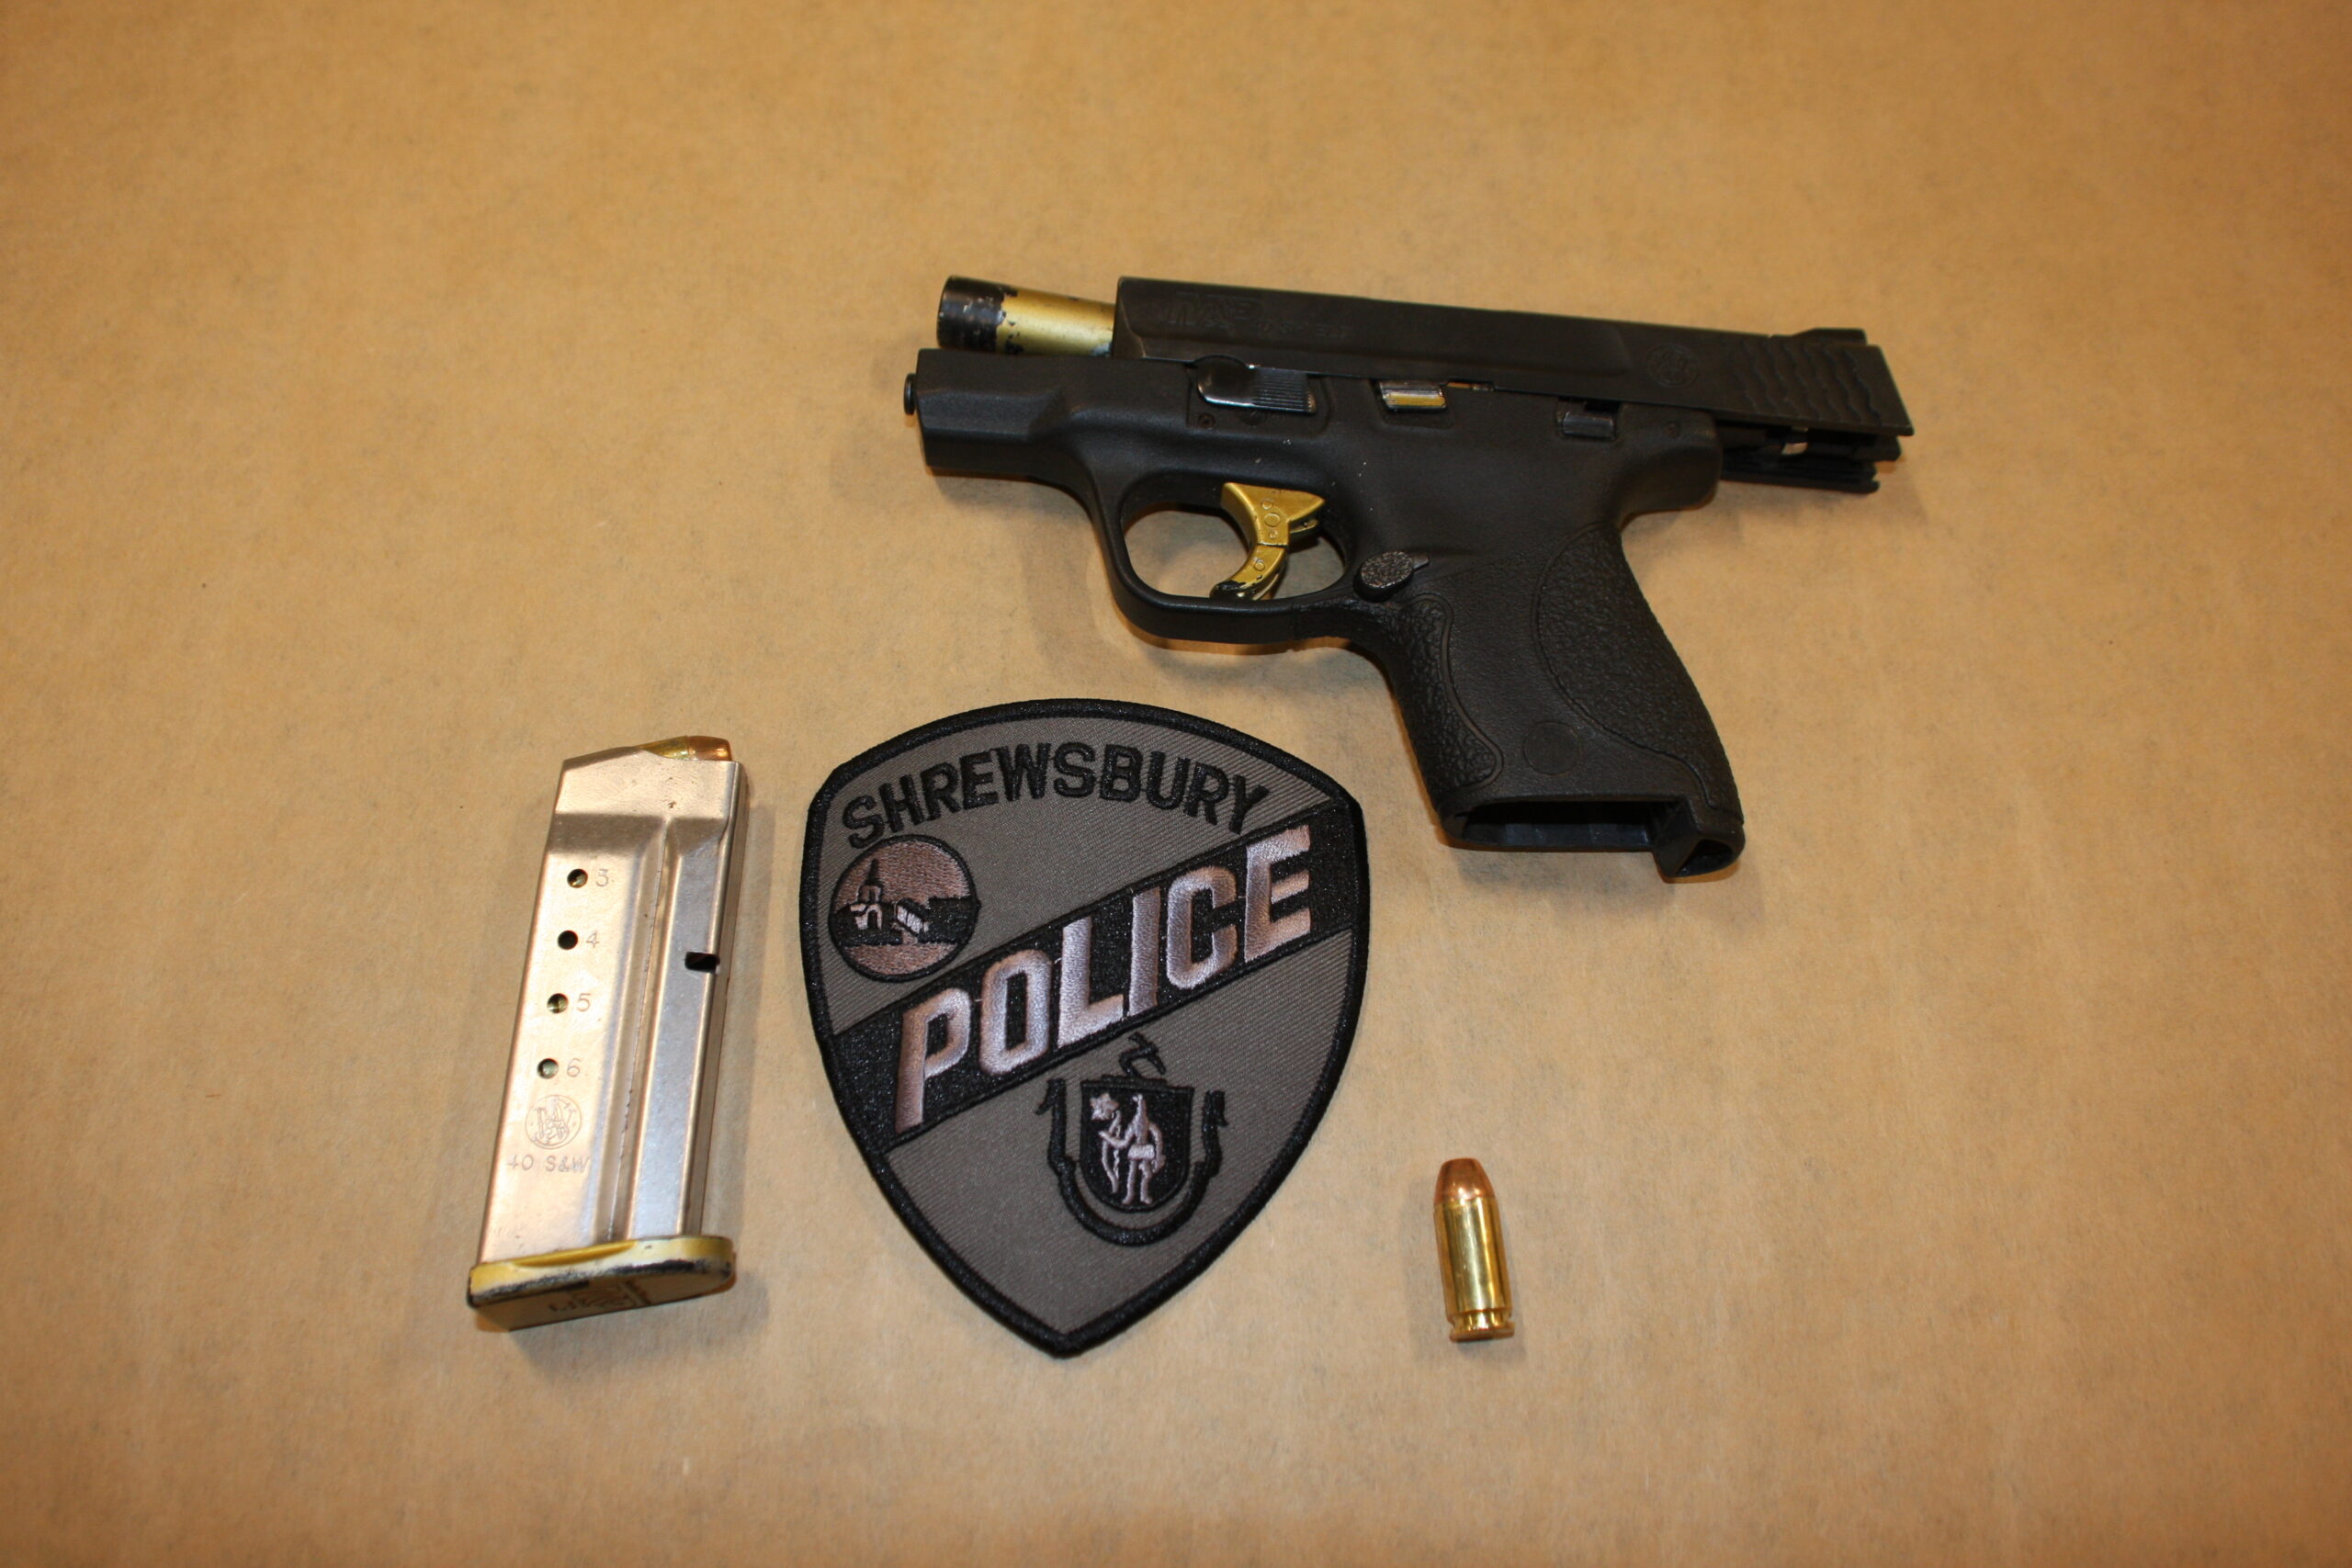 Two men arrested by Shrewsbury police on OUI, firearms charges